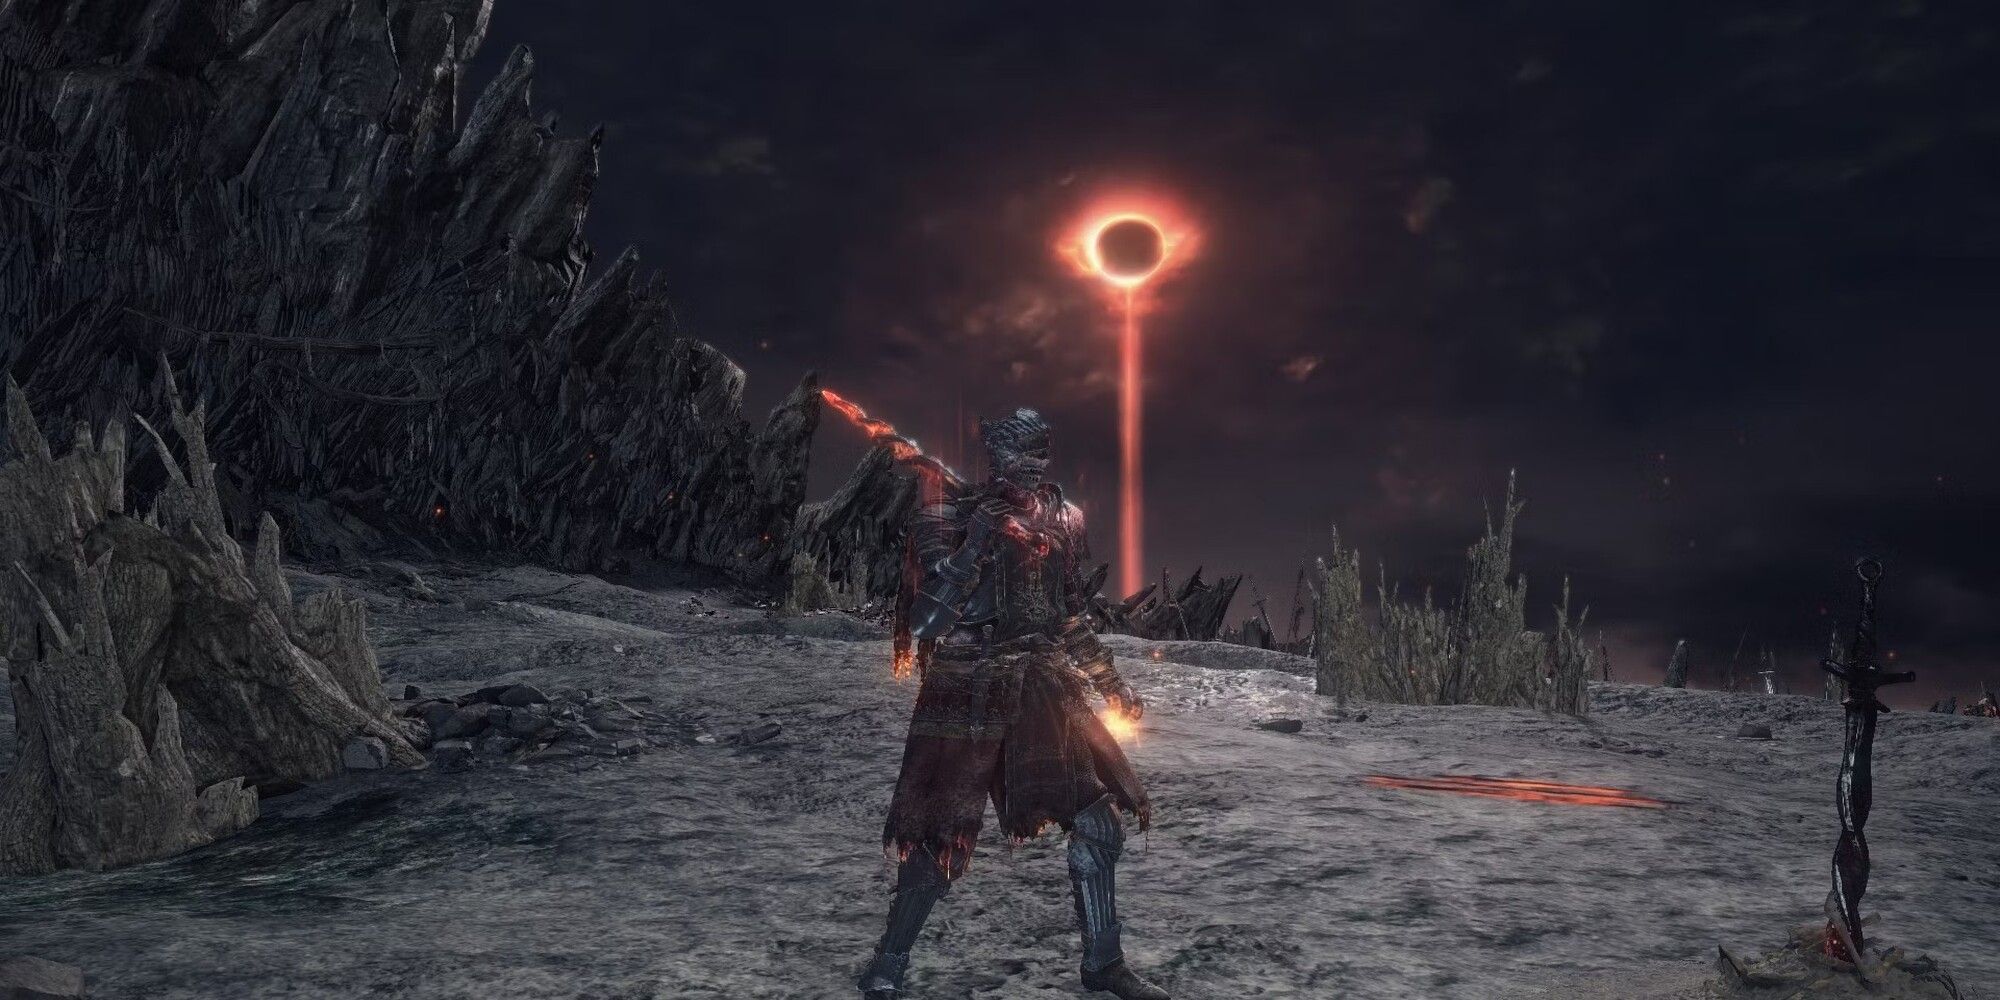 The player grabbing the unique Greatsword in a deserted line where an eclipse is taking place.